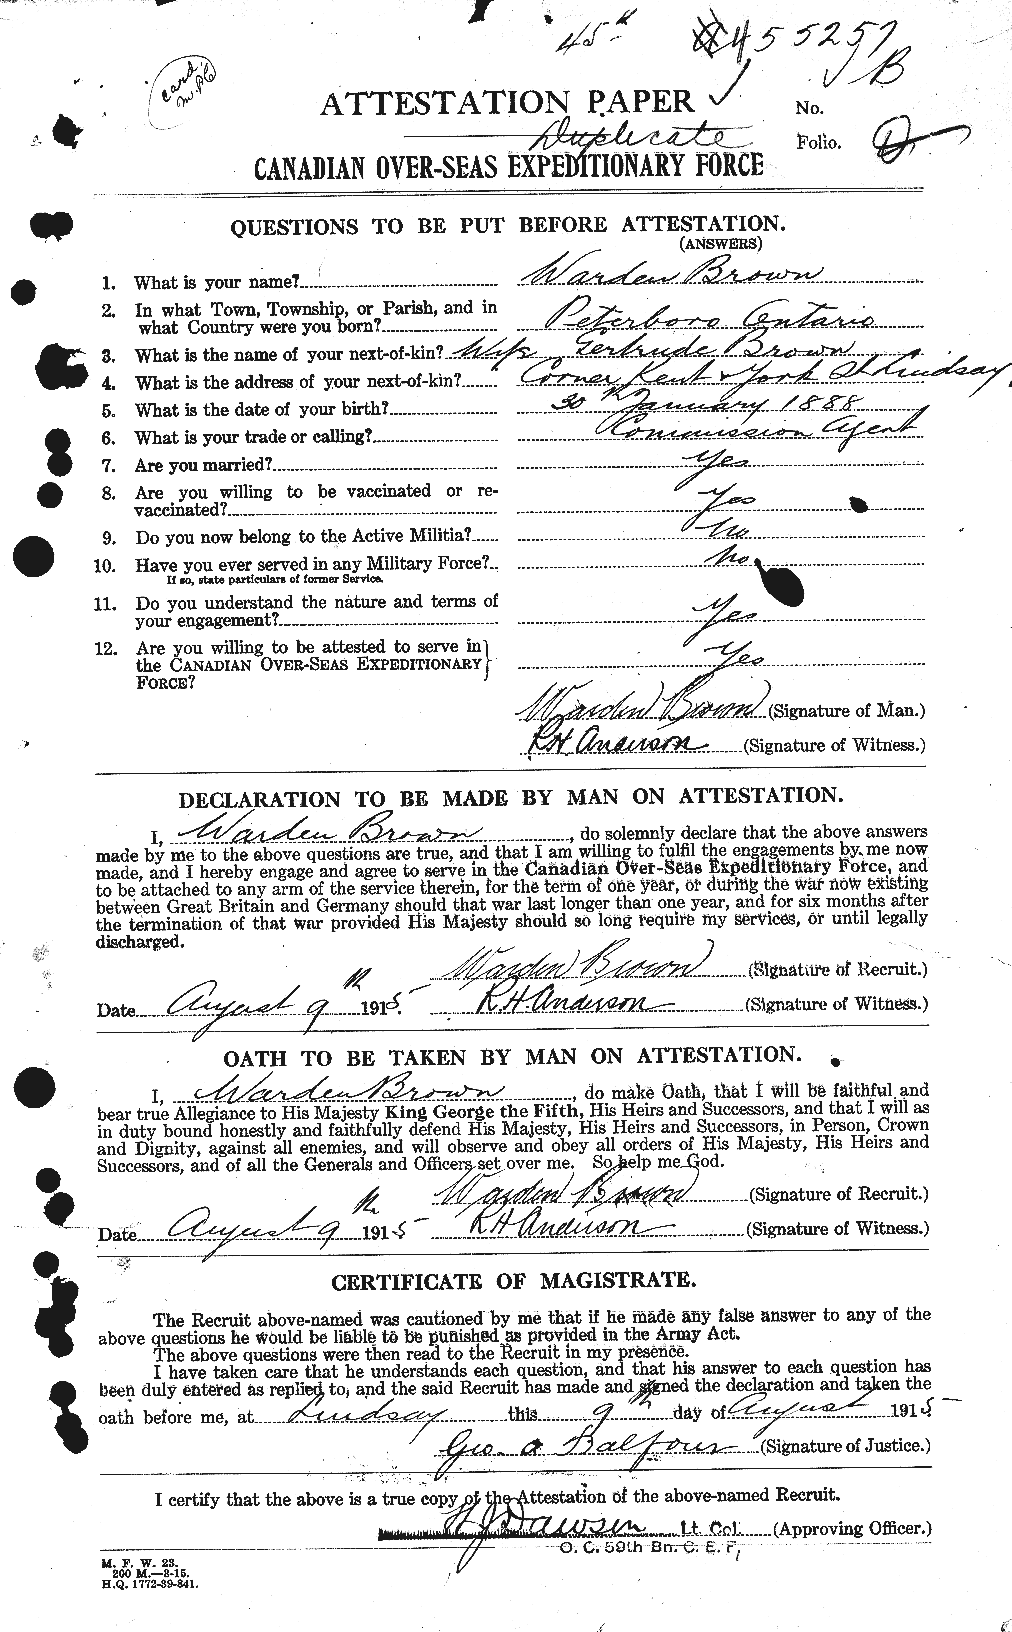 Personnel Records of the First World War - CEF 268024a